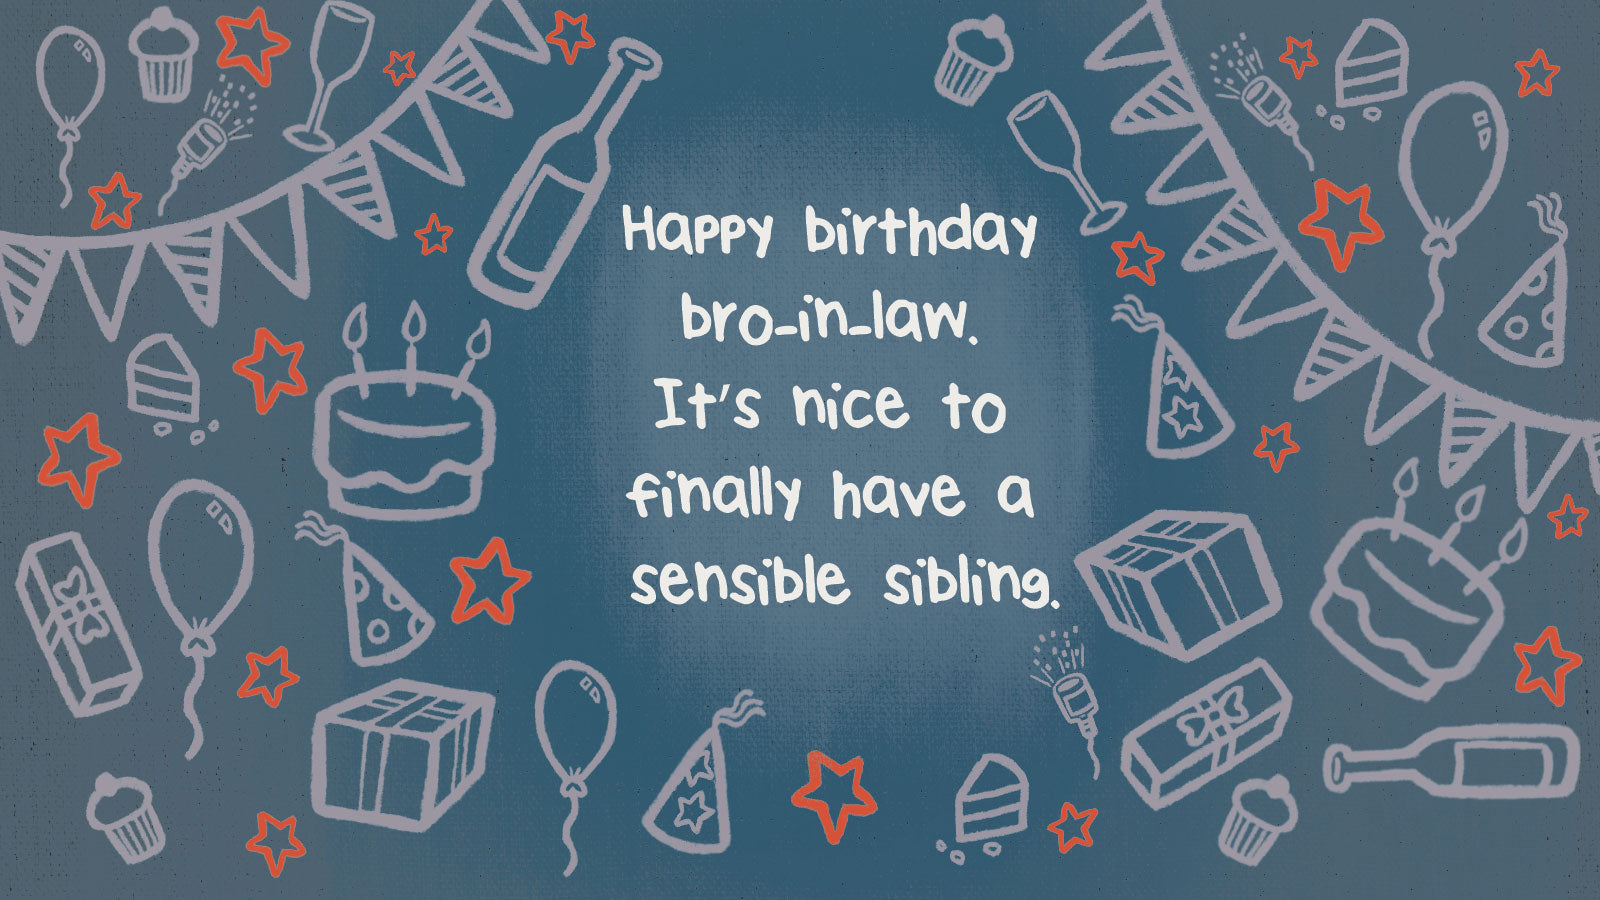 Funny Birthday Wishes For A Brother-In-Law – LimaLima